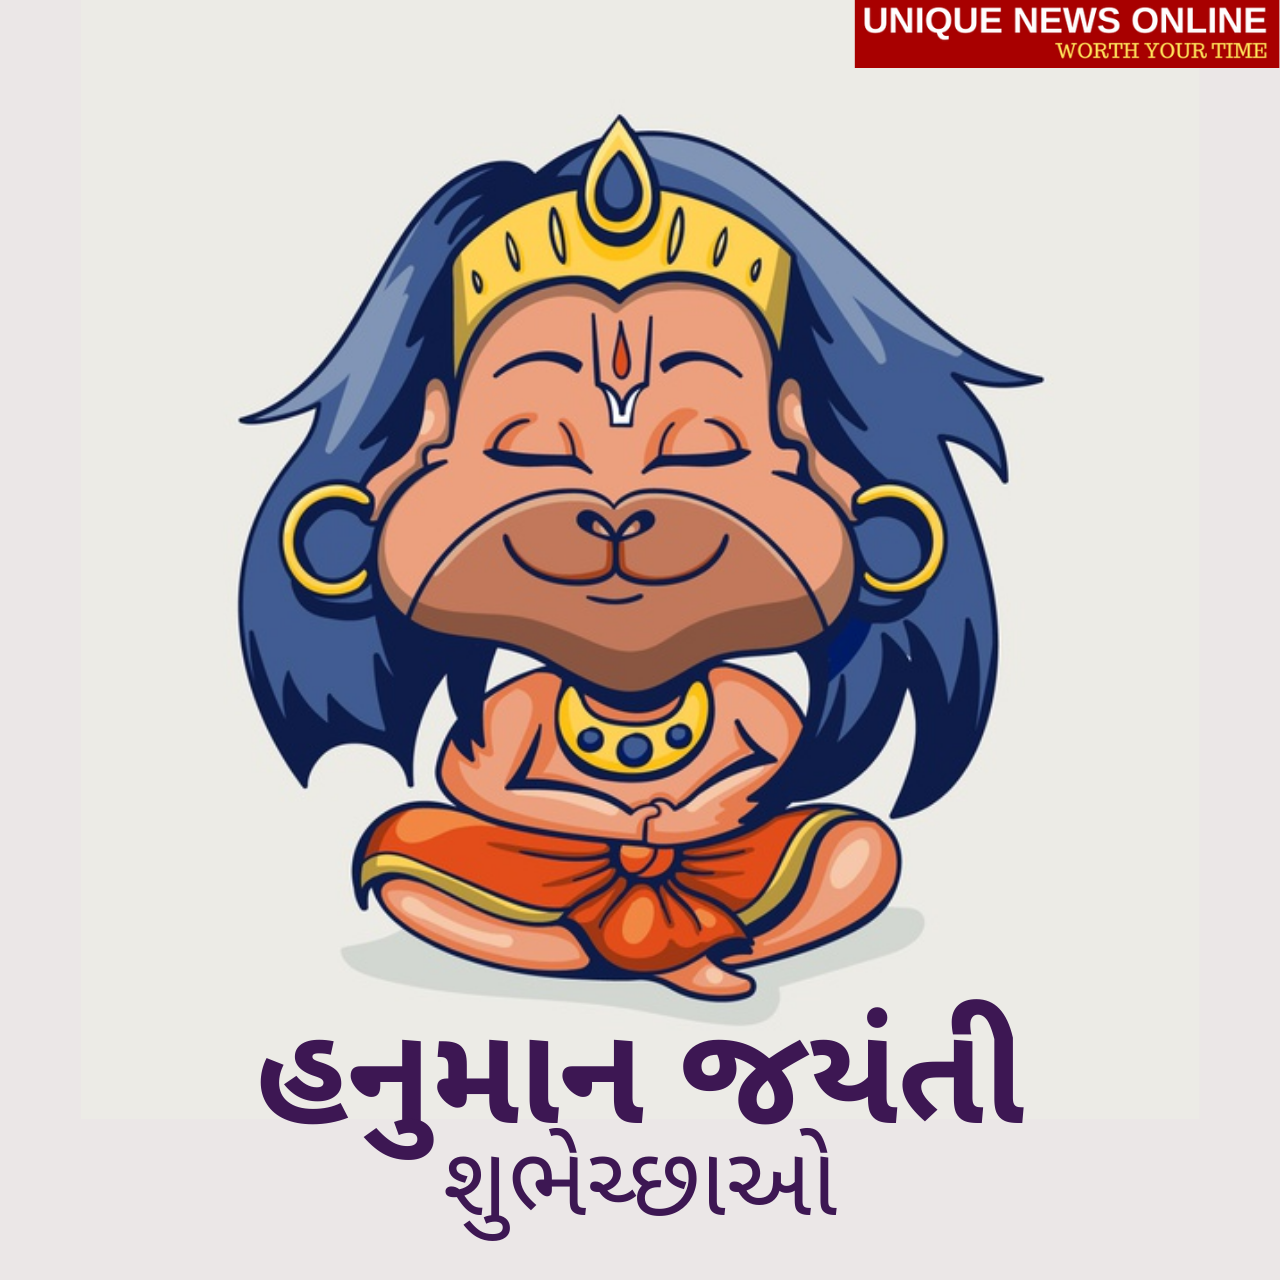 Happy Hanuman Jayanti 2021 wishes in Gujarati, Greetings, Status, Images, Messages and Quotes to Share on Hanuman Janmotsav